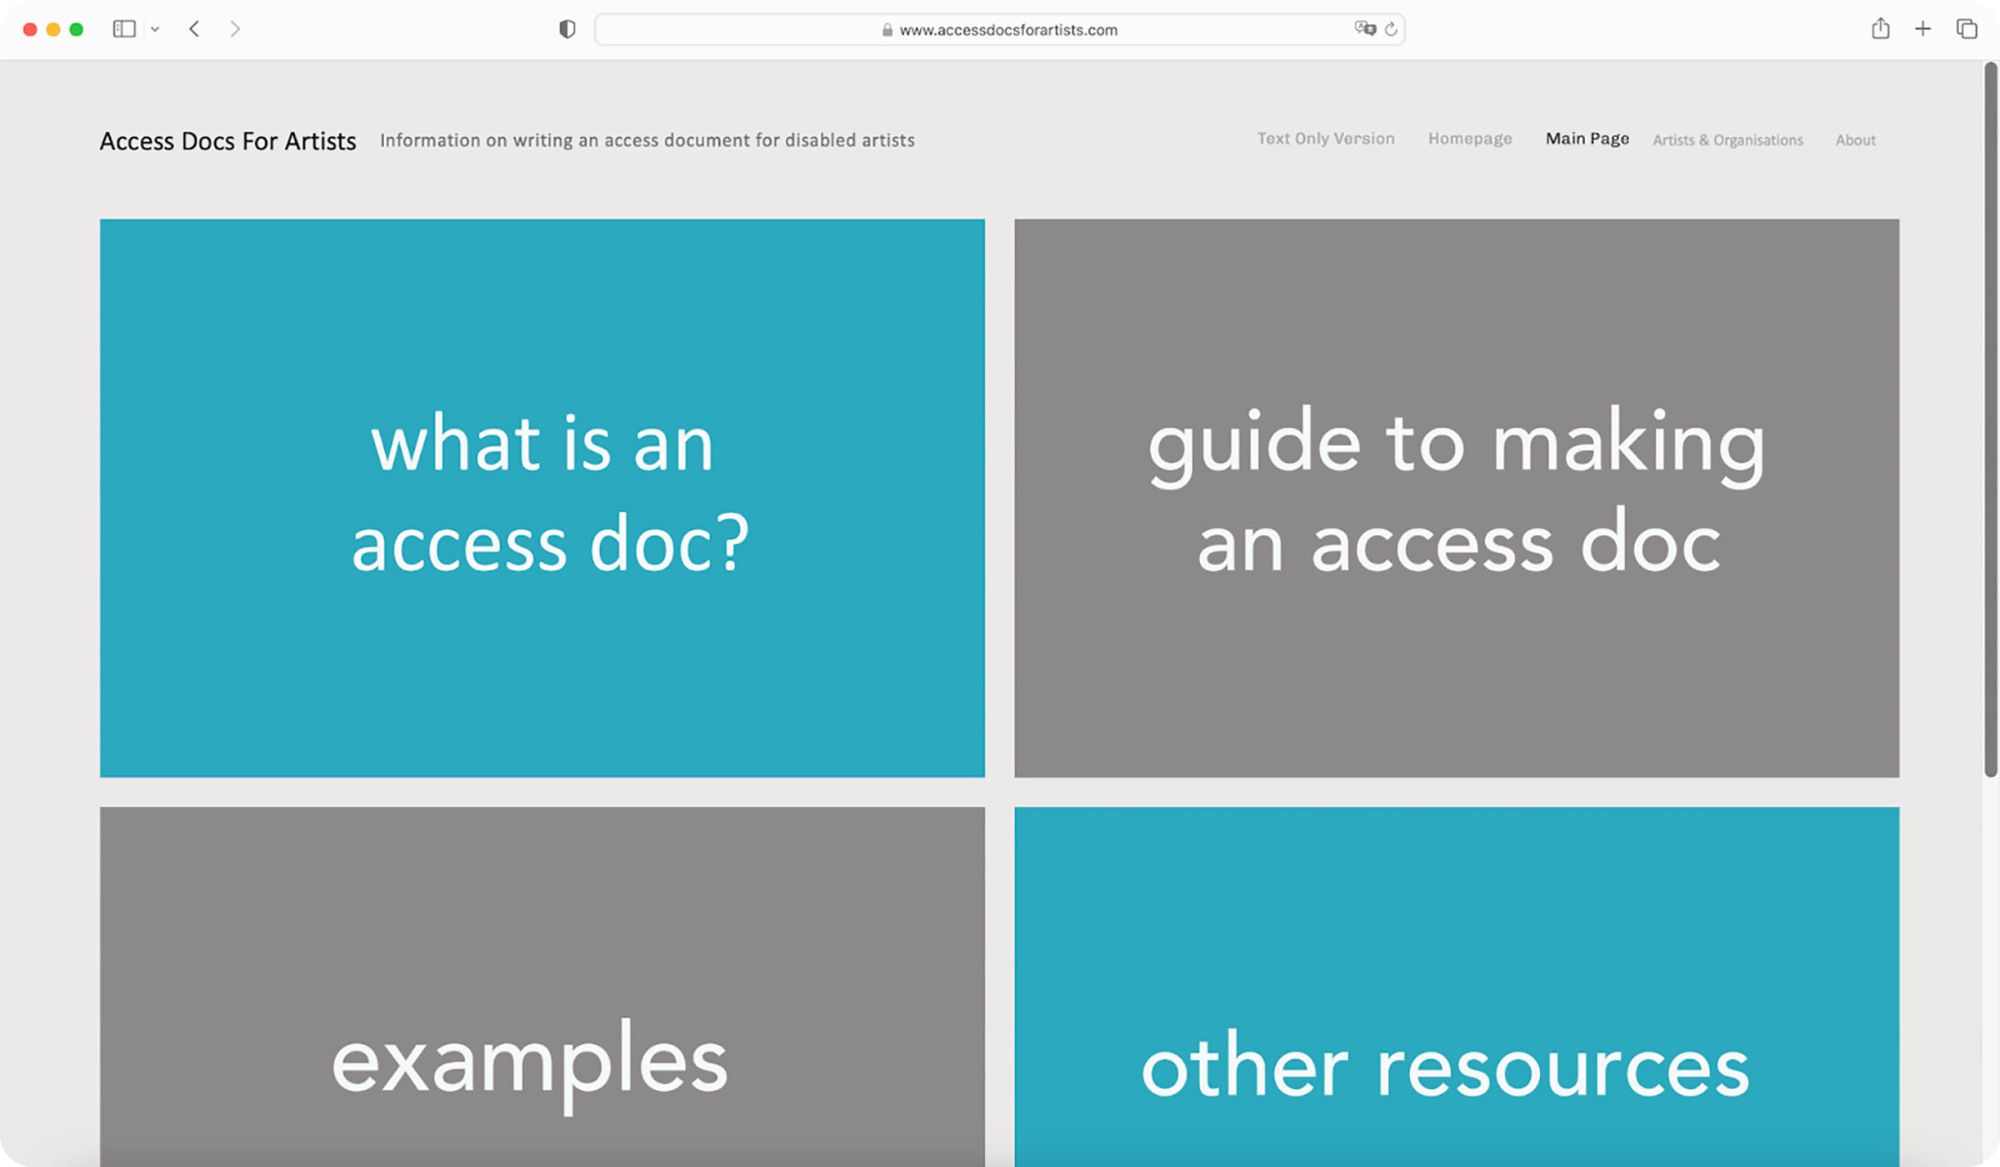 The website’s landing page. In the top left corner, with a small type, it says: “Access Docs for Artists—Information on writing an access document for disabled artists.” Below, four big blocks indicate the website’s four main sections: “What is an access doc?,” “guide to making an access doc,” “examples,” and “other resources.”